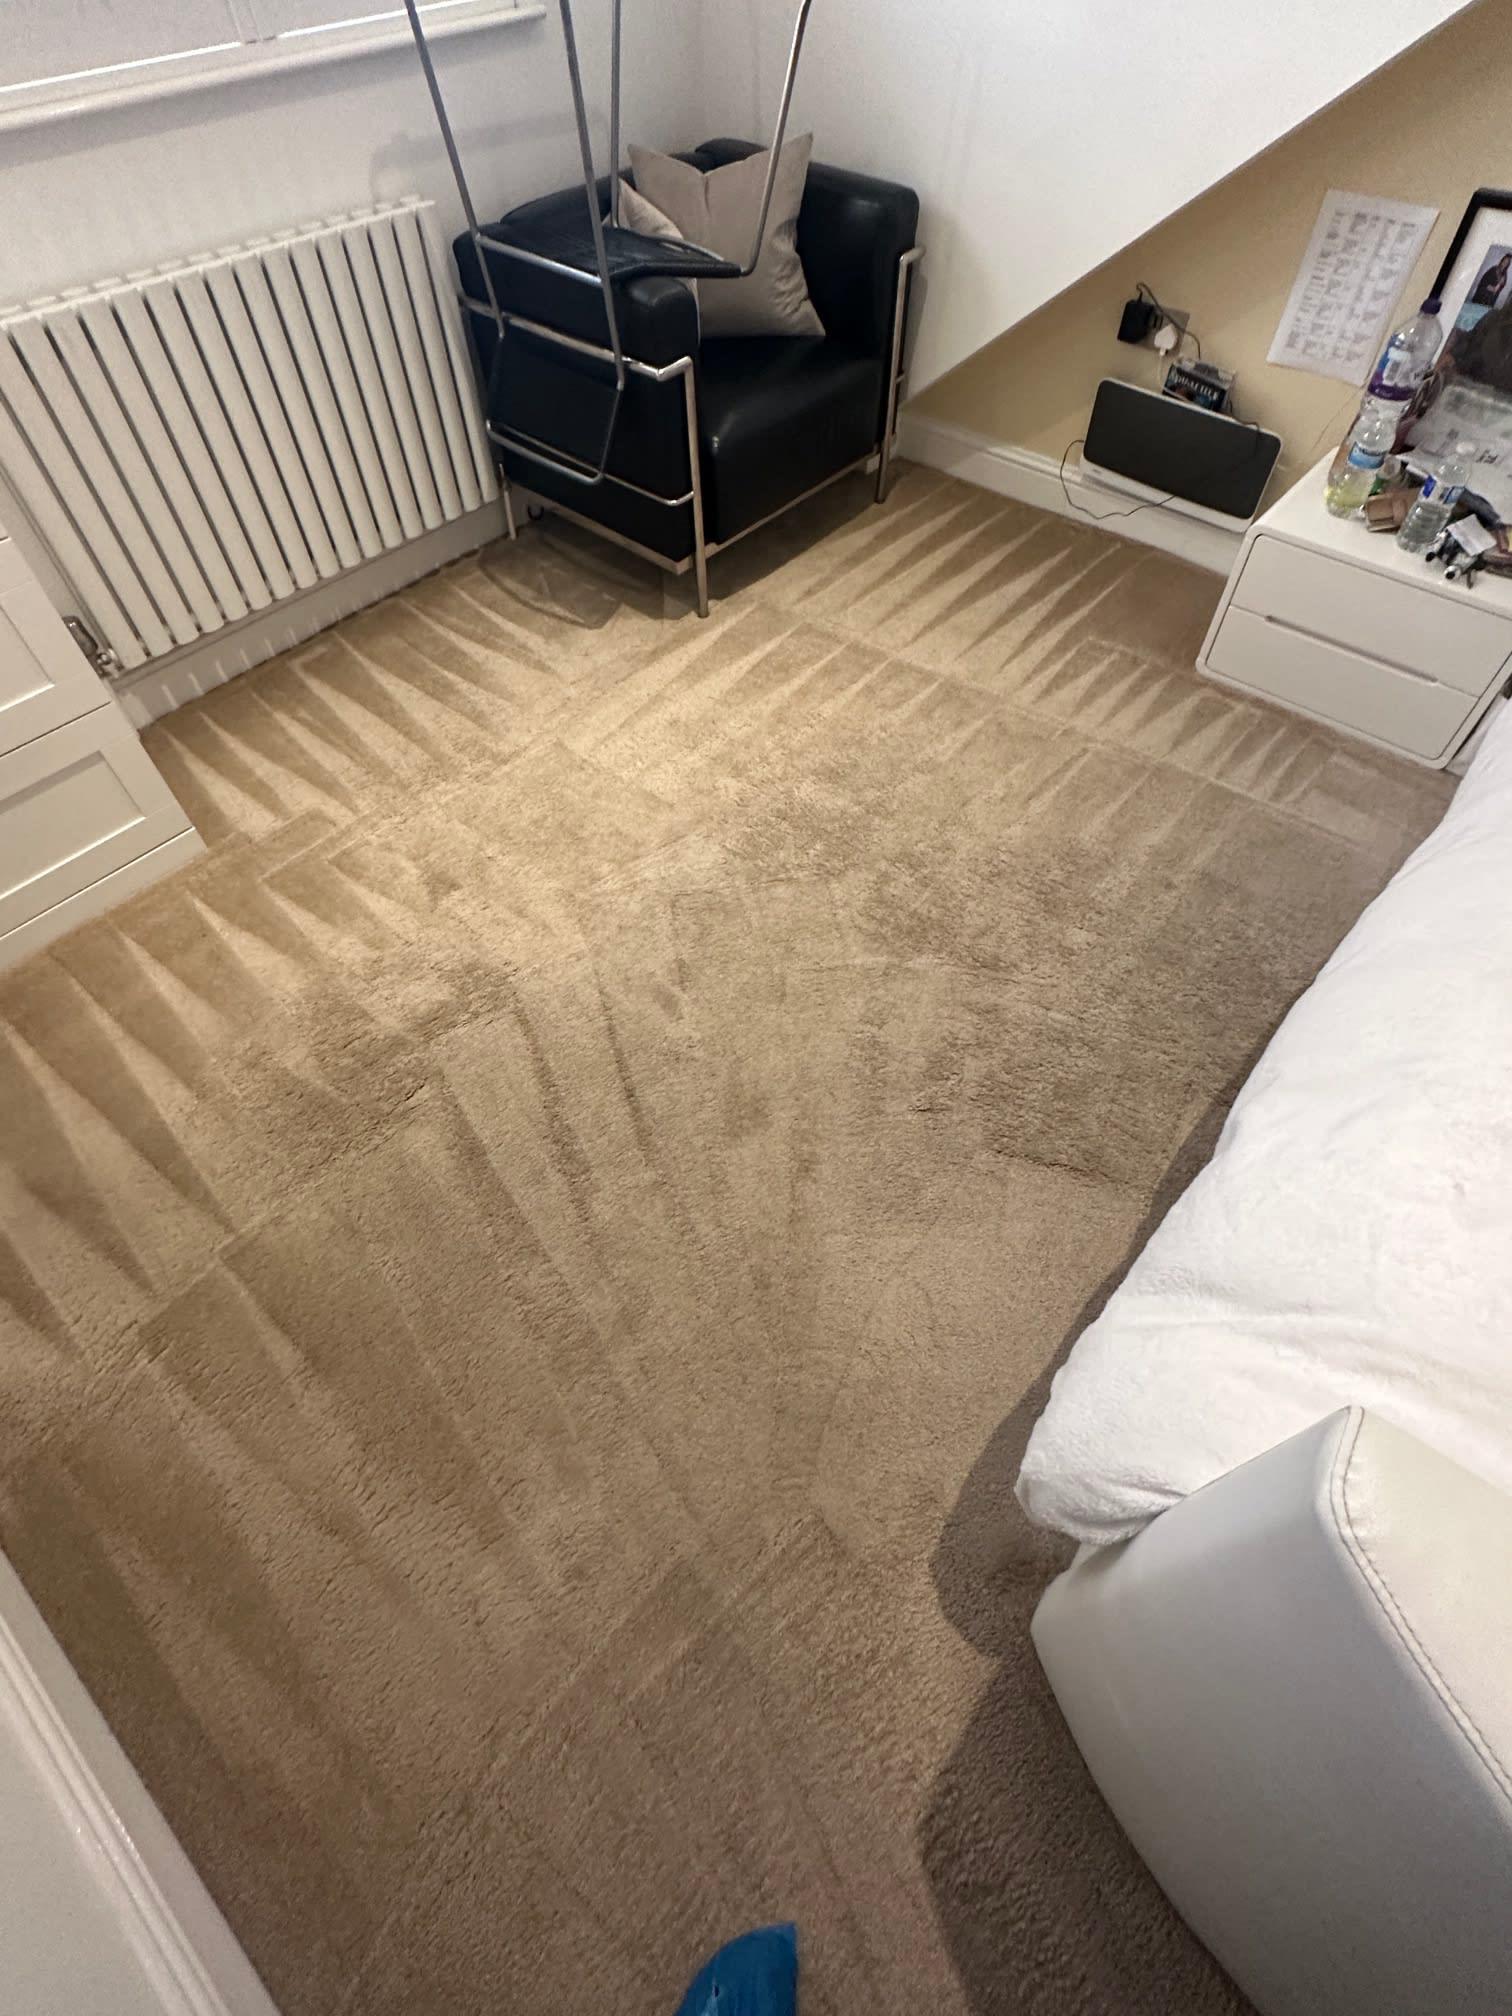 Images Carpet Cleaning Near Me